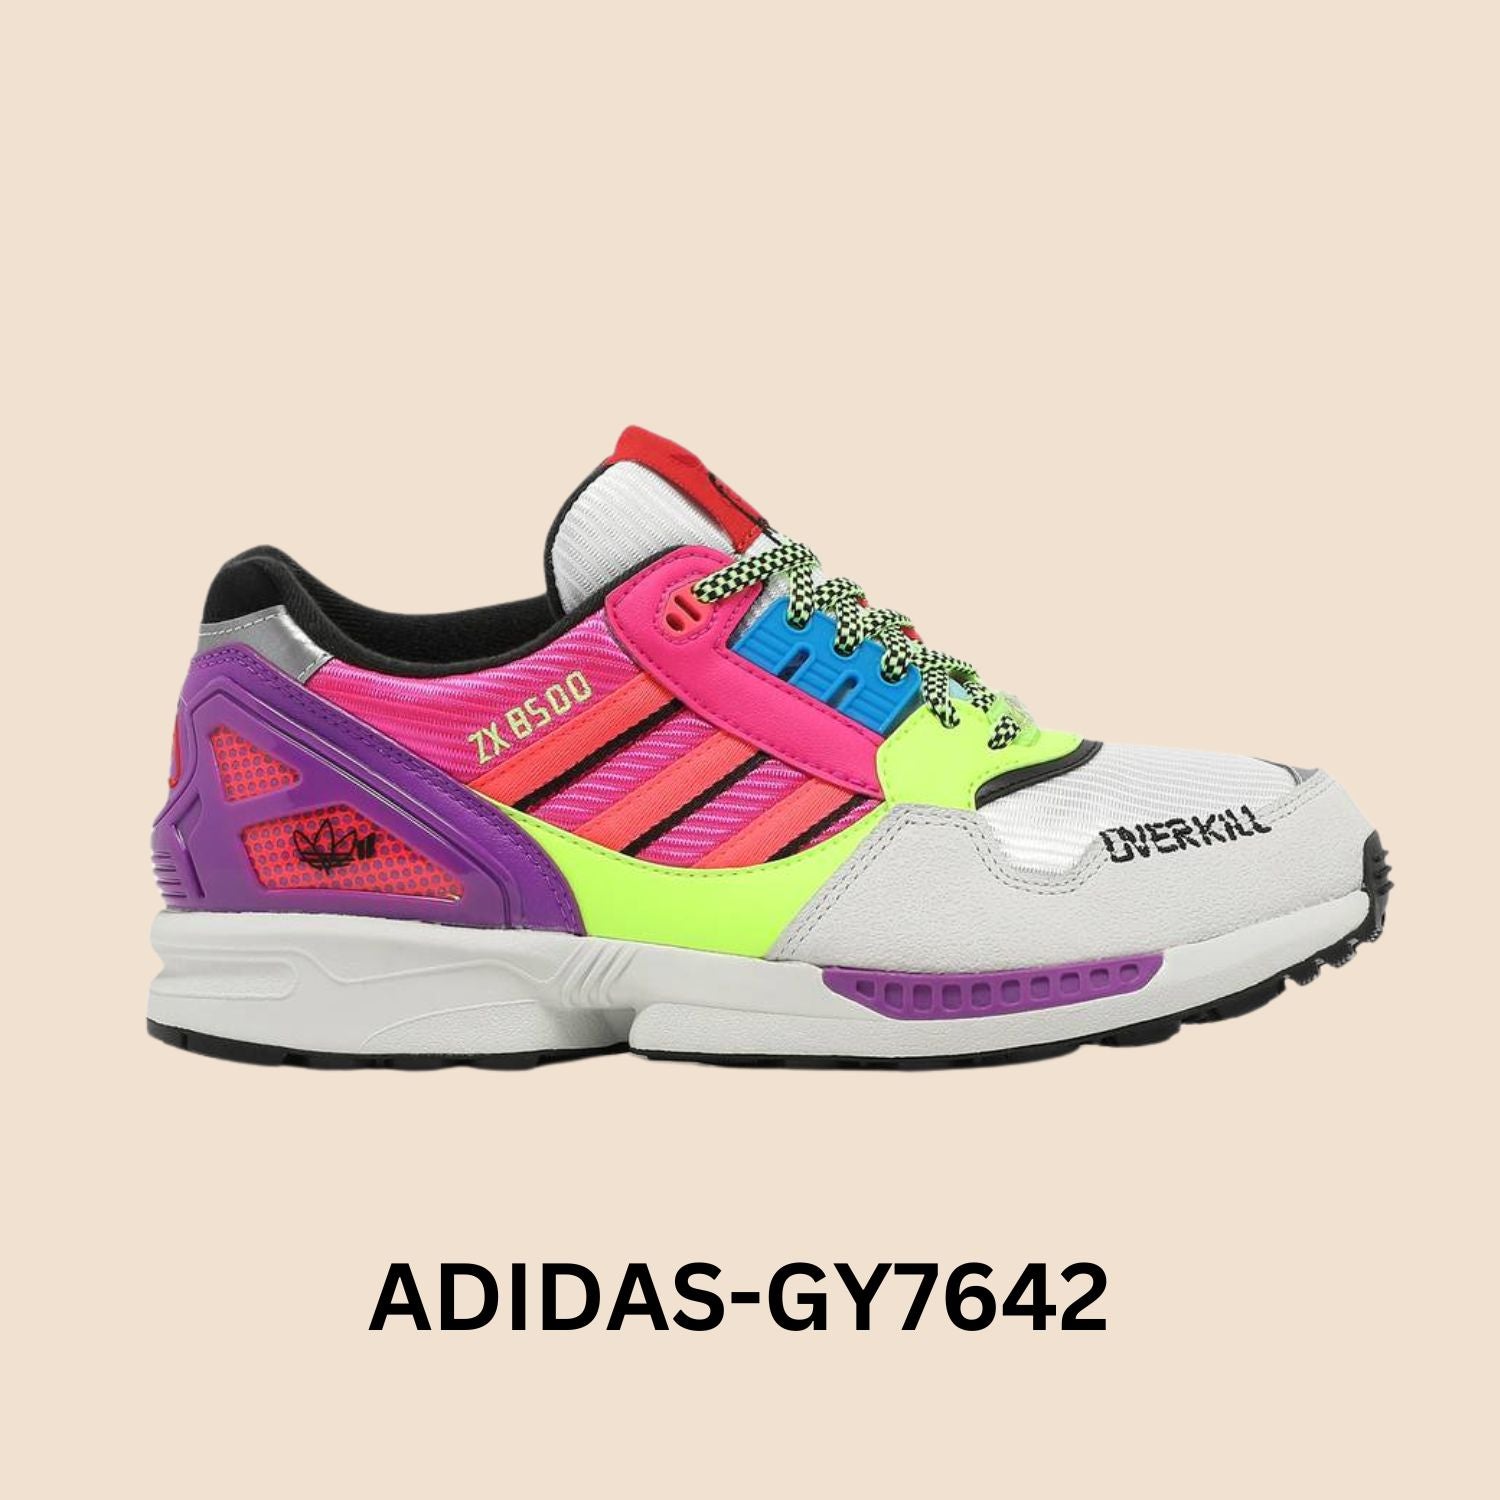 Adidas Overkill  8500 "A-ZX Series" Men's Style# GY7642